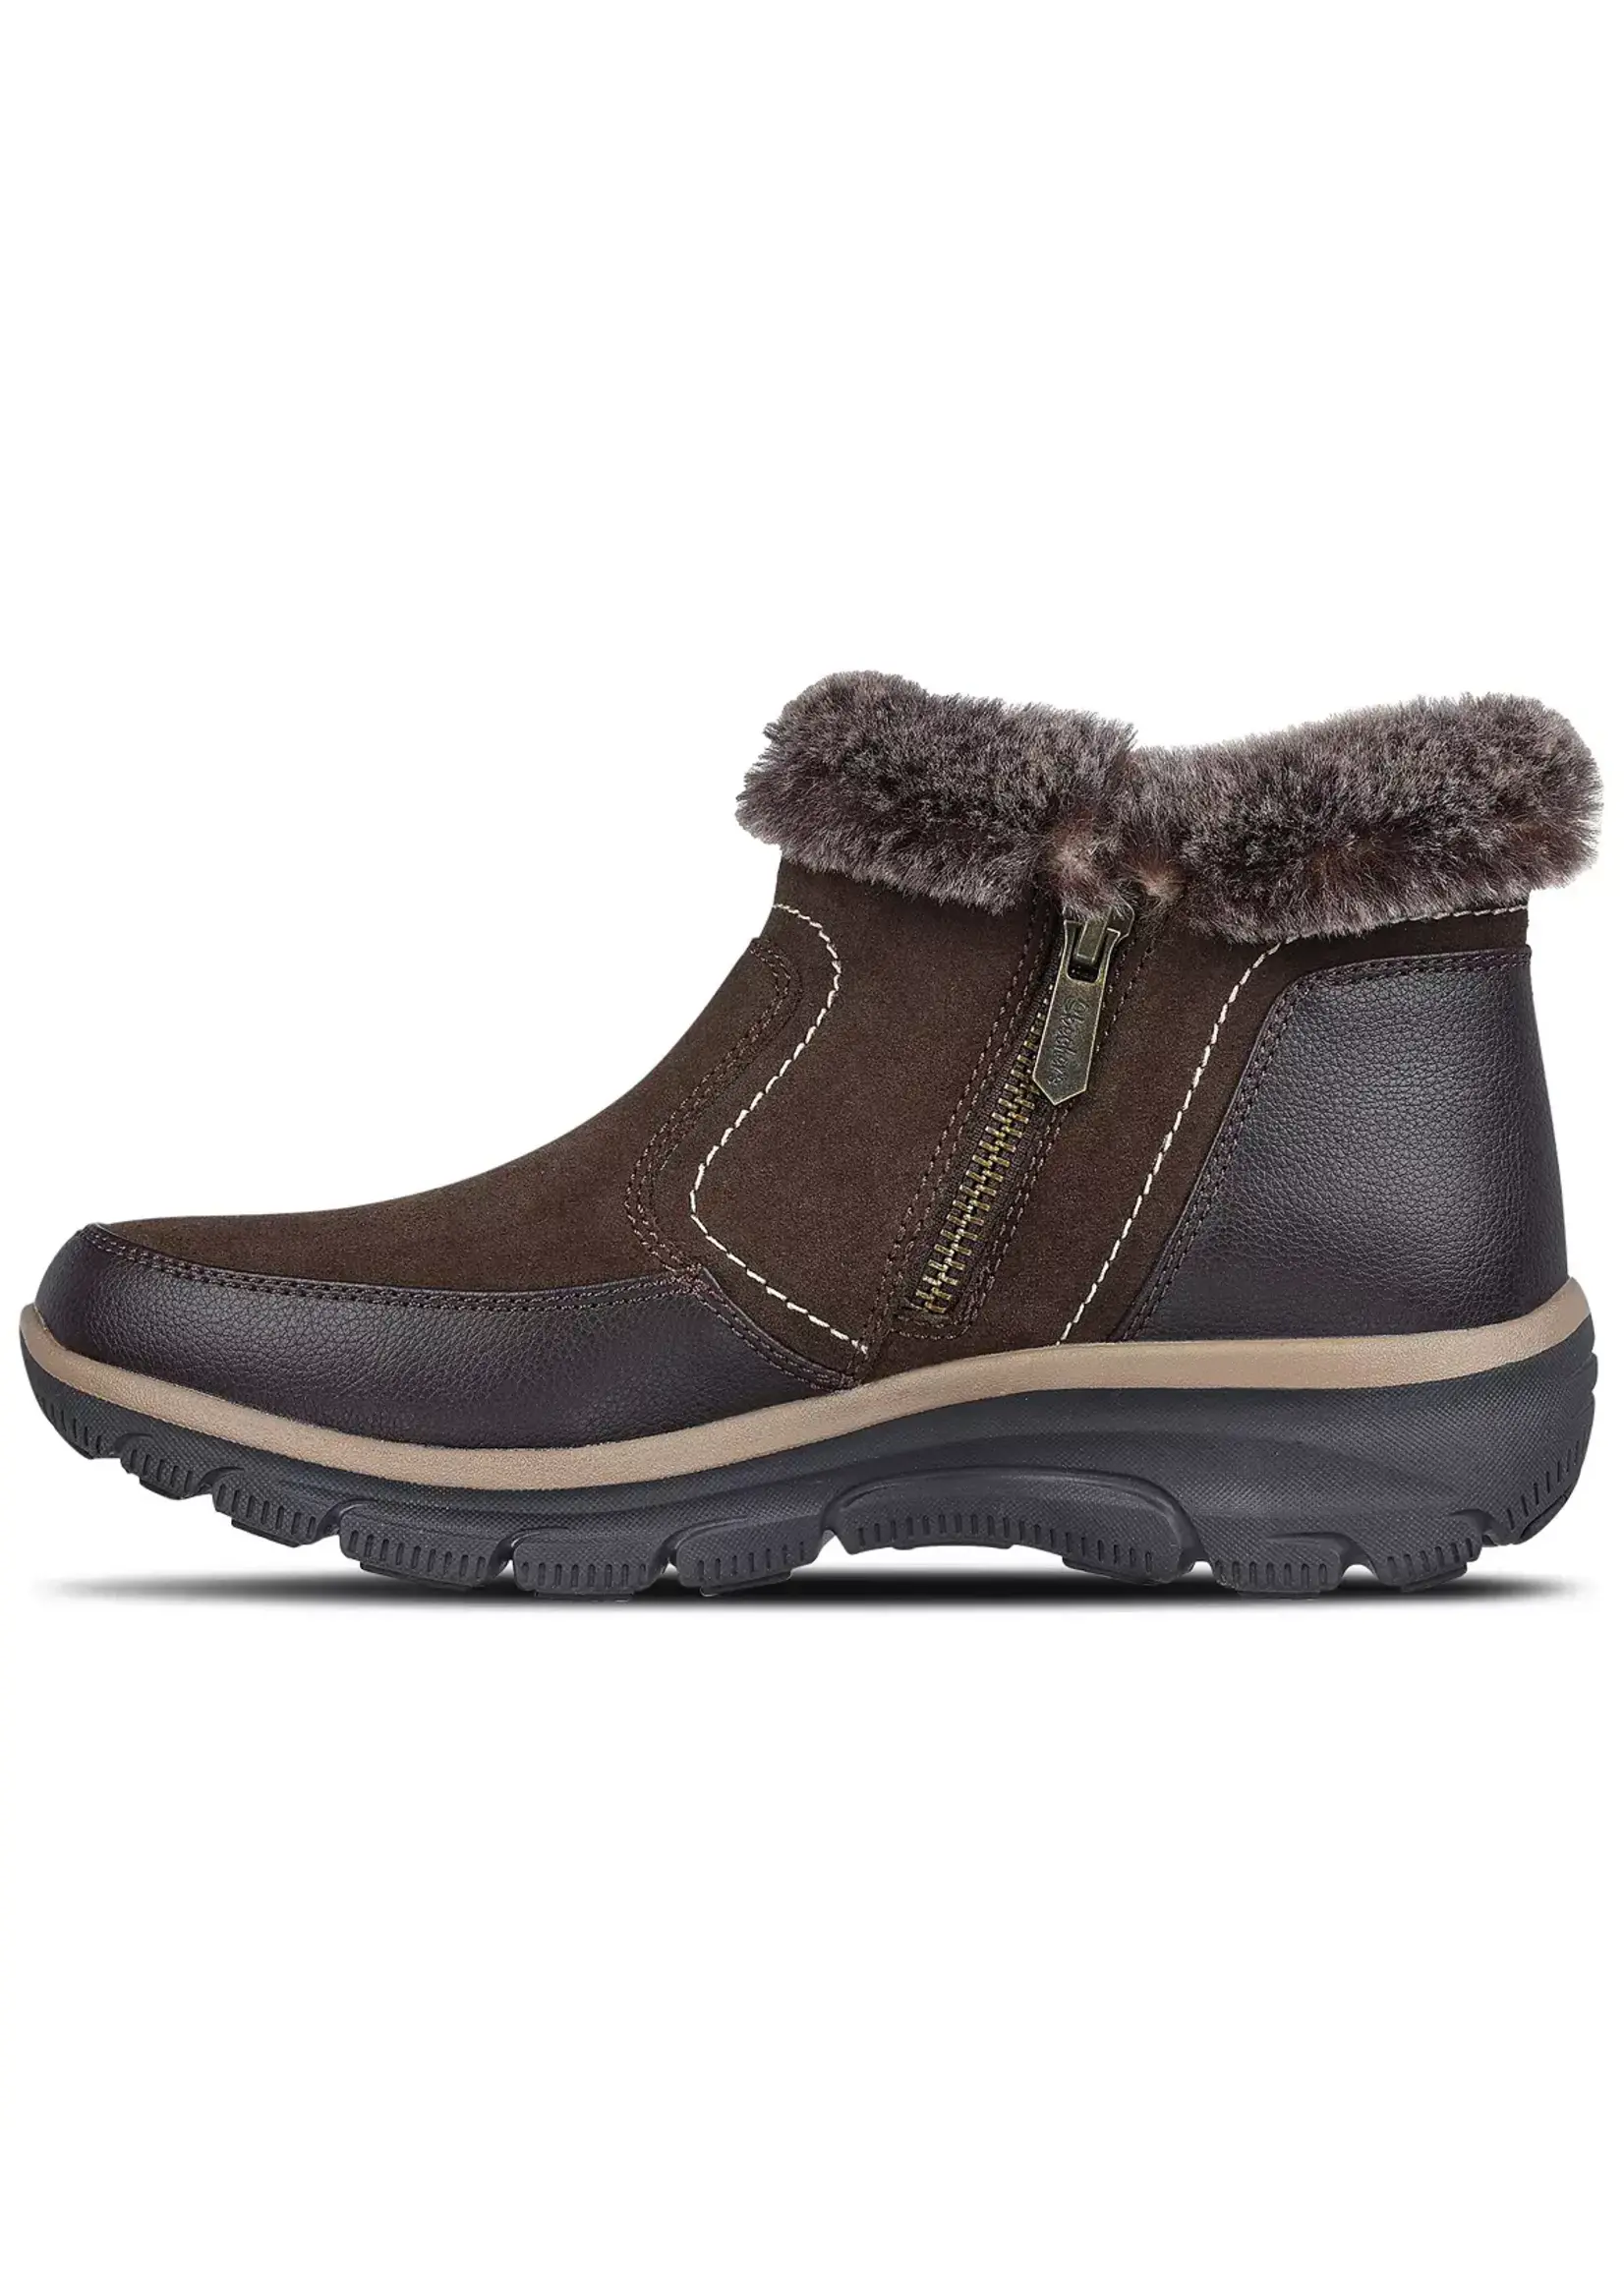 Skechers Women's Easy Going Warm Escape Fashion Boot Chocolate